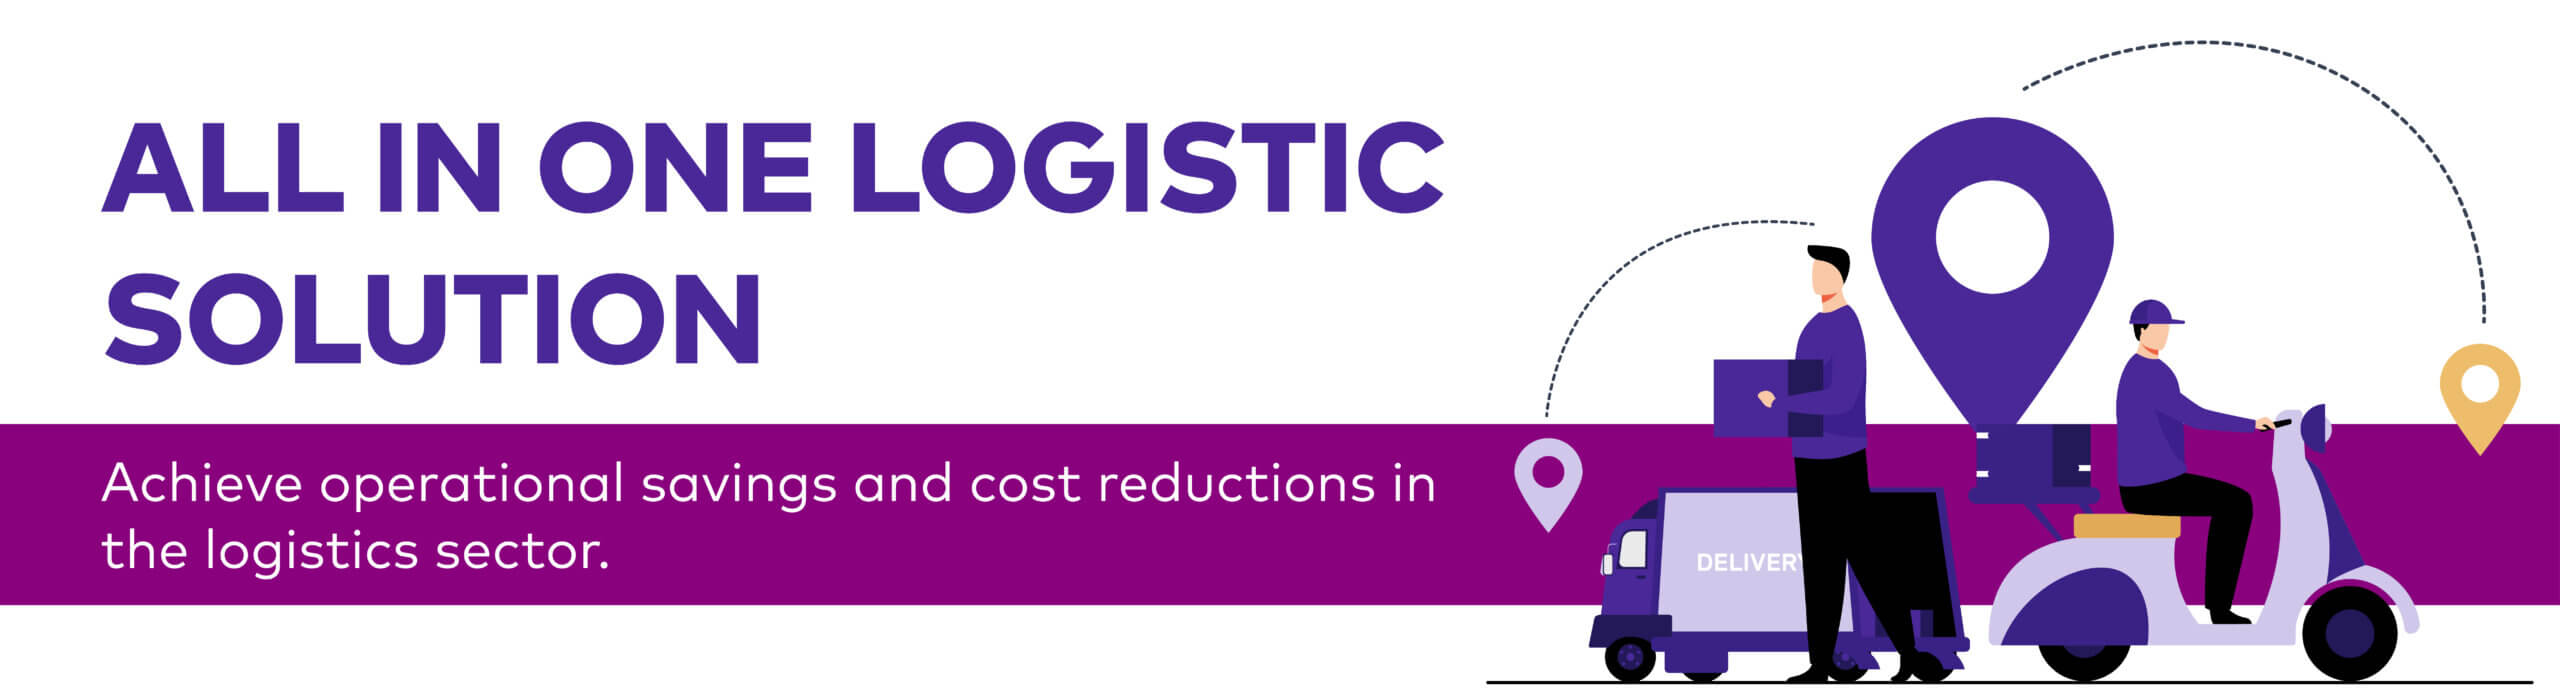 All In One Logistic Solution